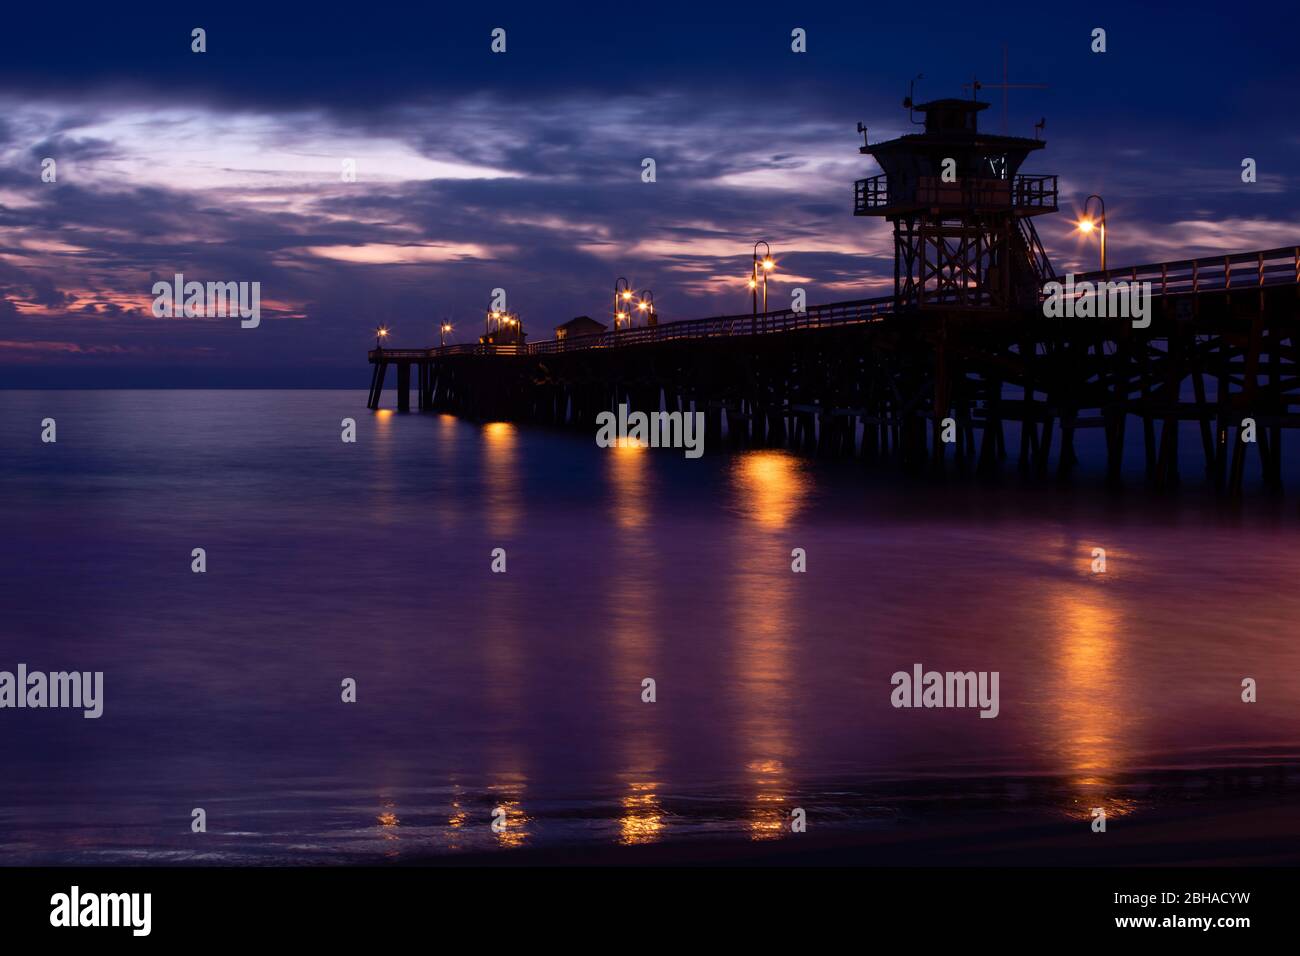 Silhouette of pier at sunset, San Clemente, California, USA Stock Photo